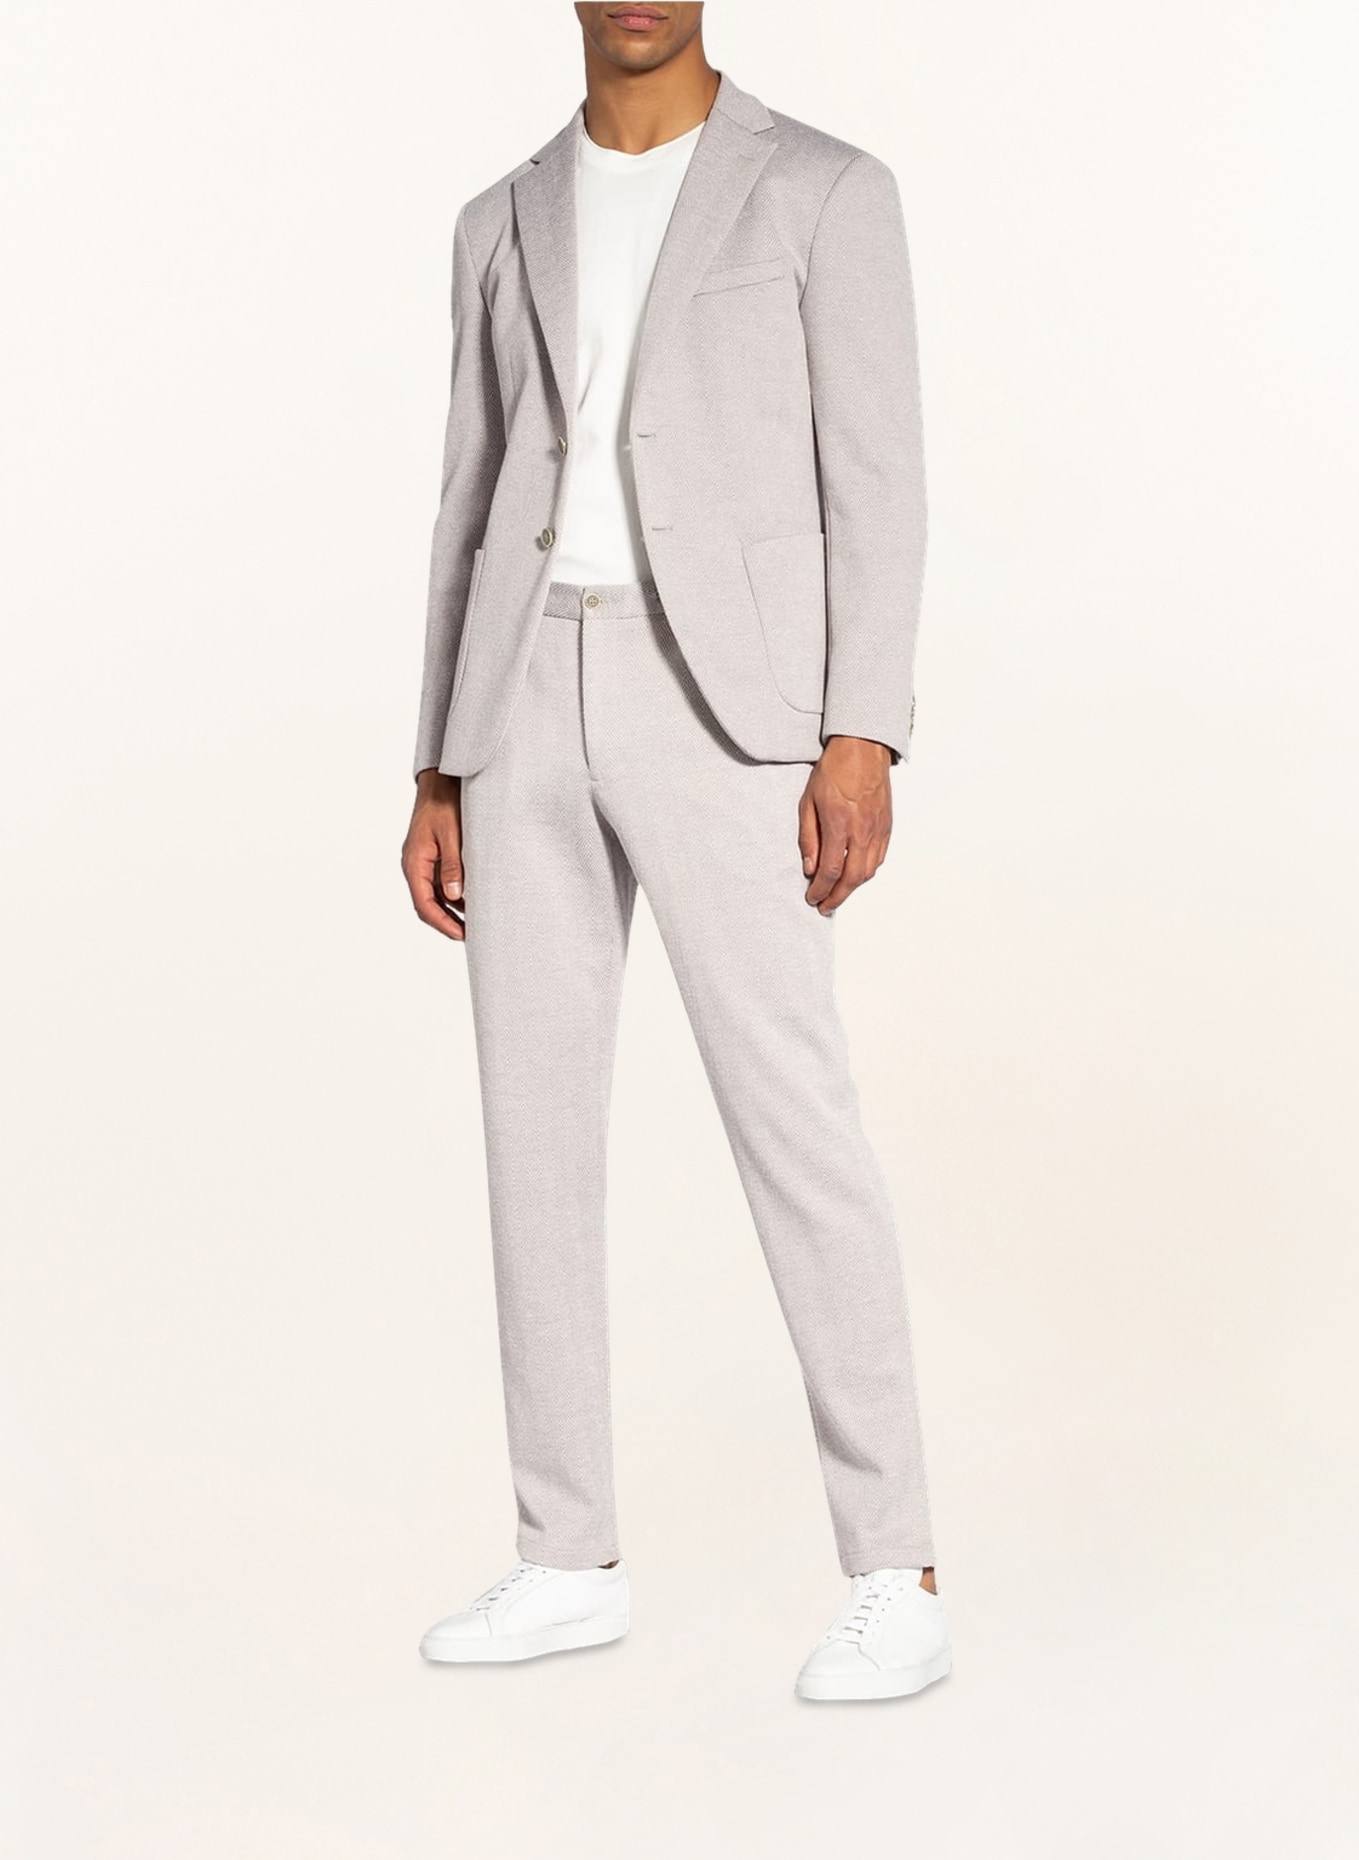 PAUL Suit jacket slim fit in jersey, Color: WHITE/ LIGHT GRAY (Image 2)